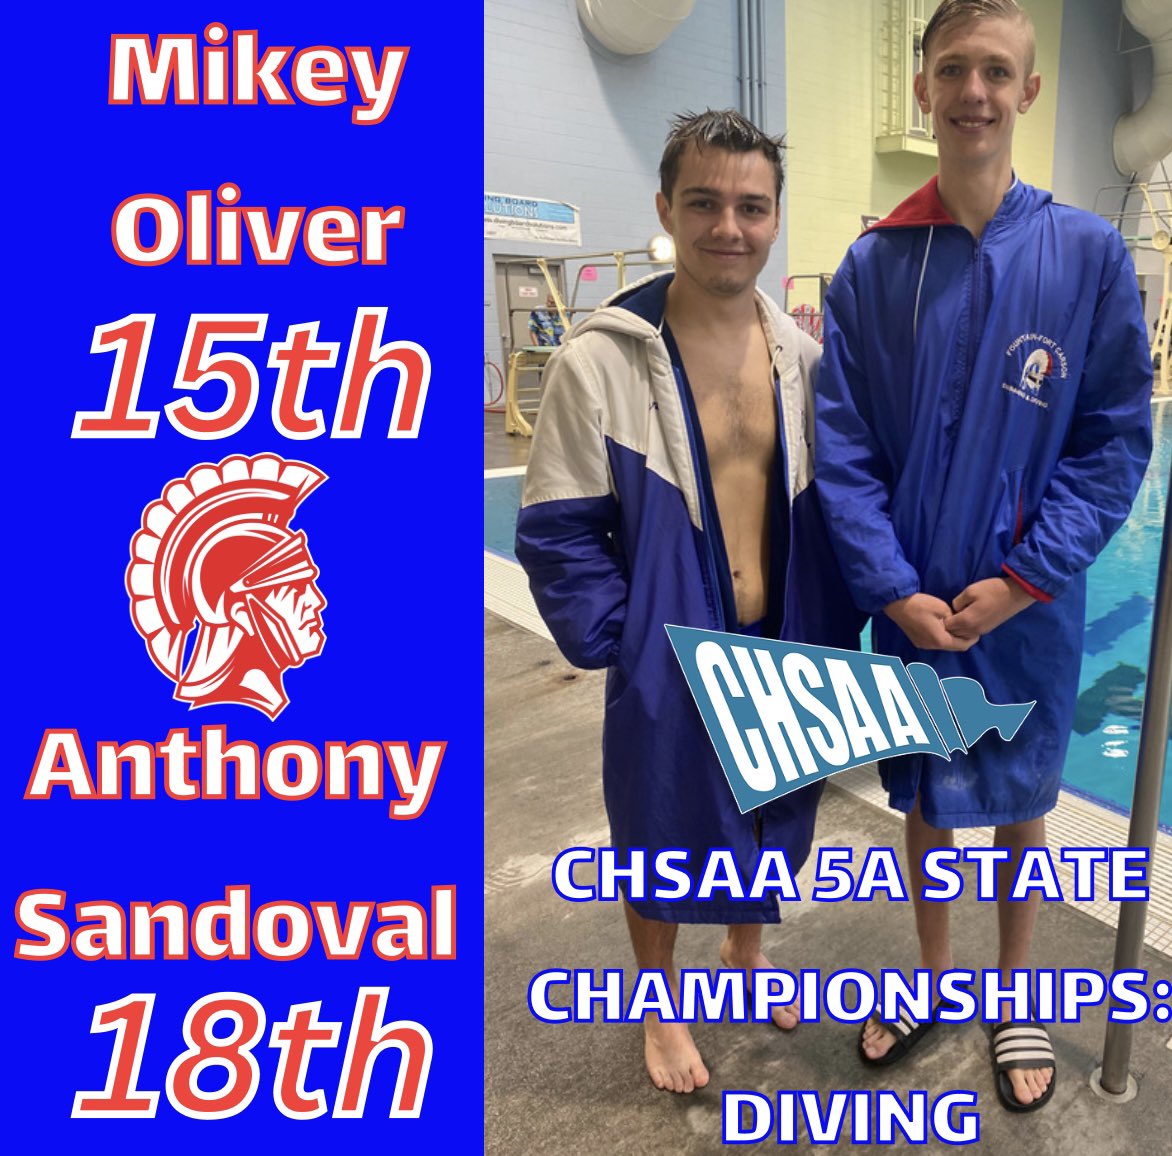 Congratulations to Mikey Oliver and Anthony Sandoval for their top 20 finishes in diving at the CHSAA State Championships today! 🏊🏼‍♂️ @CHSAA @coloradopreps @DanMohrmann @RobNamnoum @lukezahlmann @gazettepreps @FFC8schools @FfchsB @fountain_preps